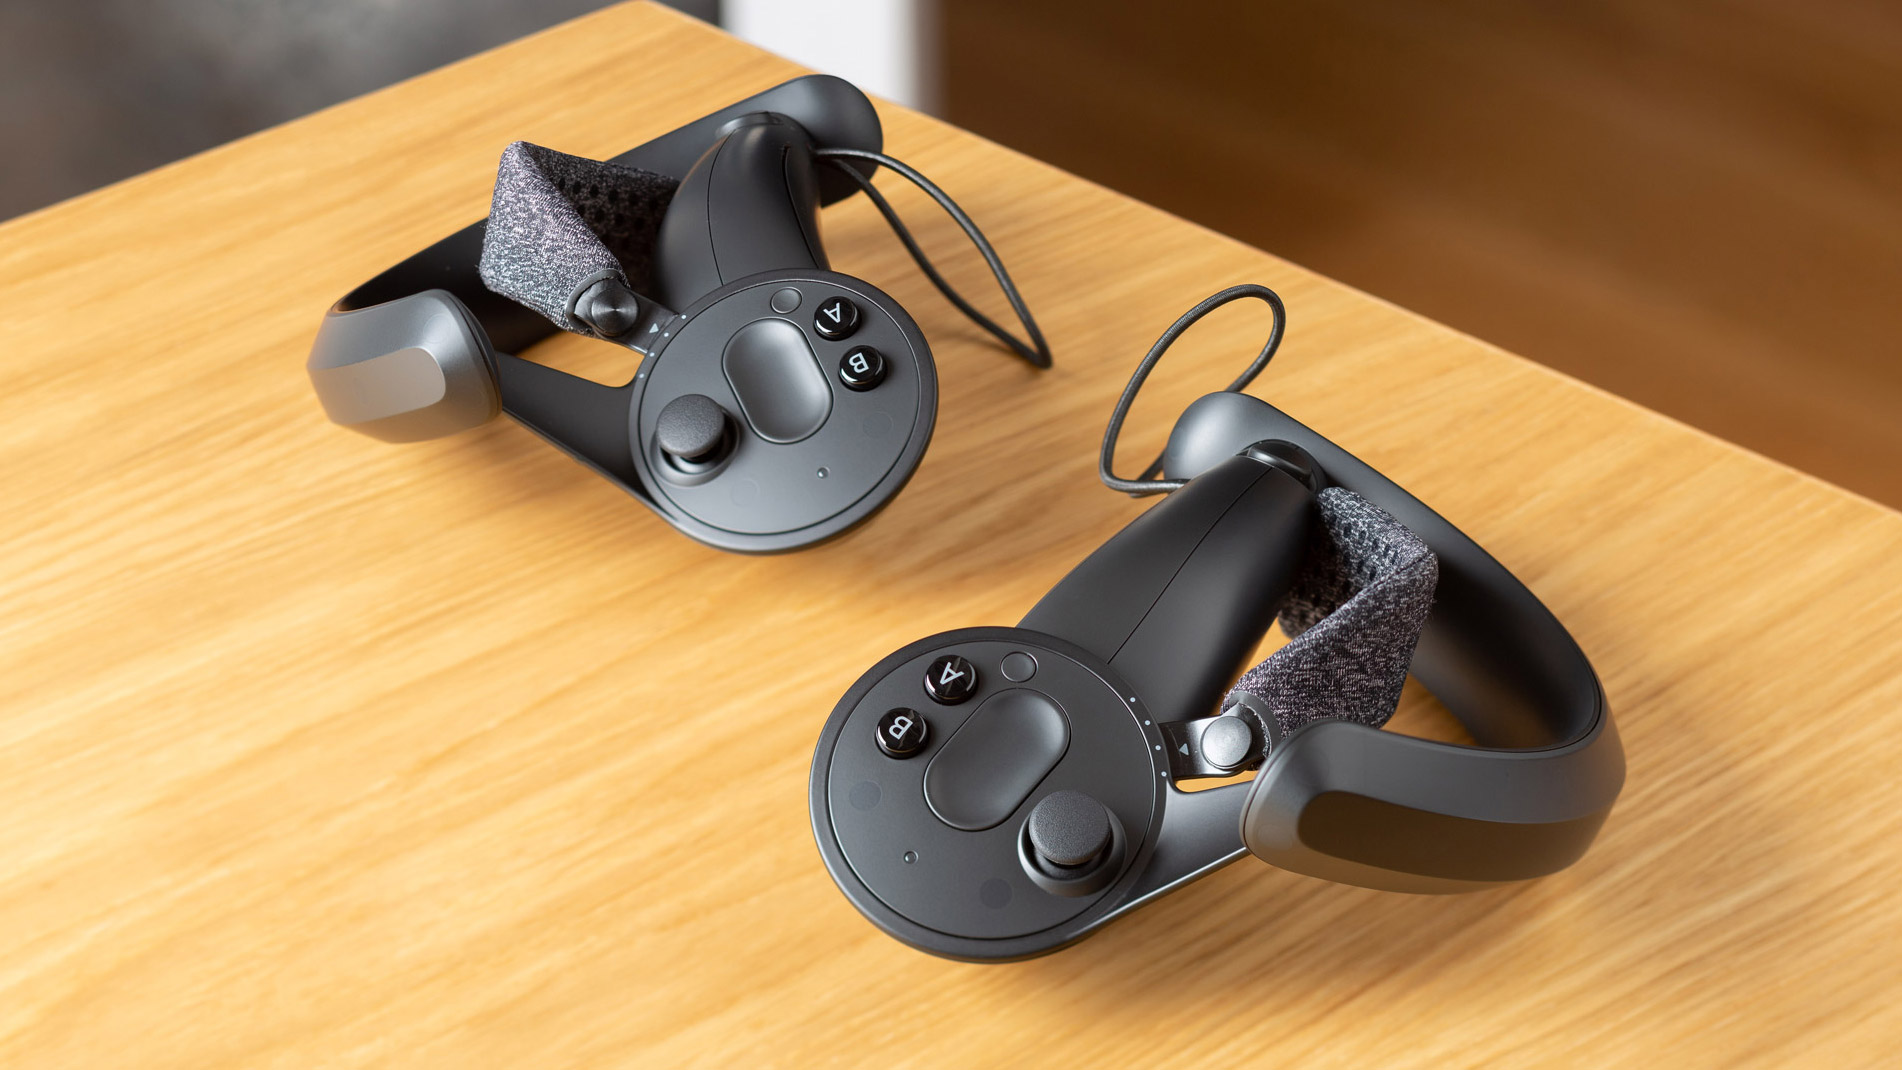 rift s index controllers